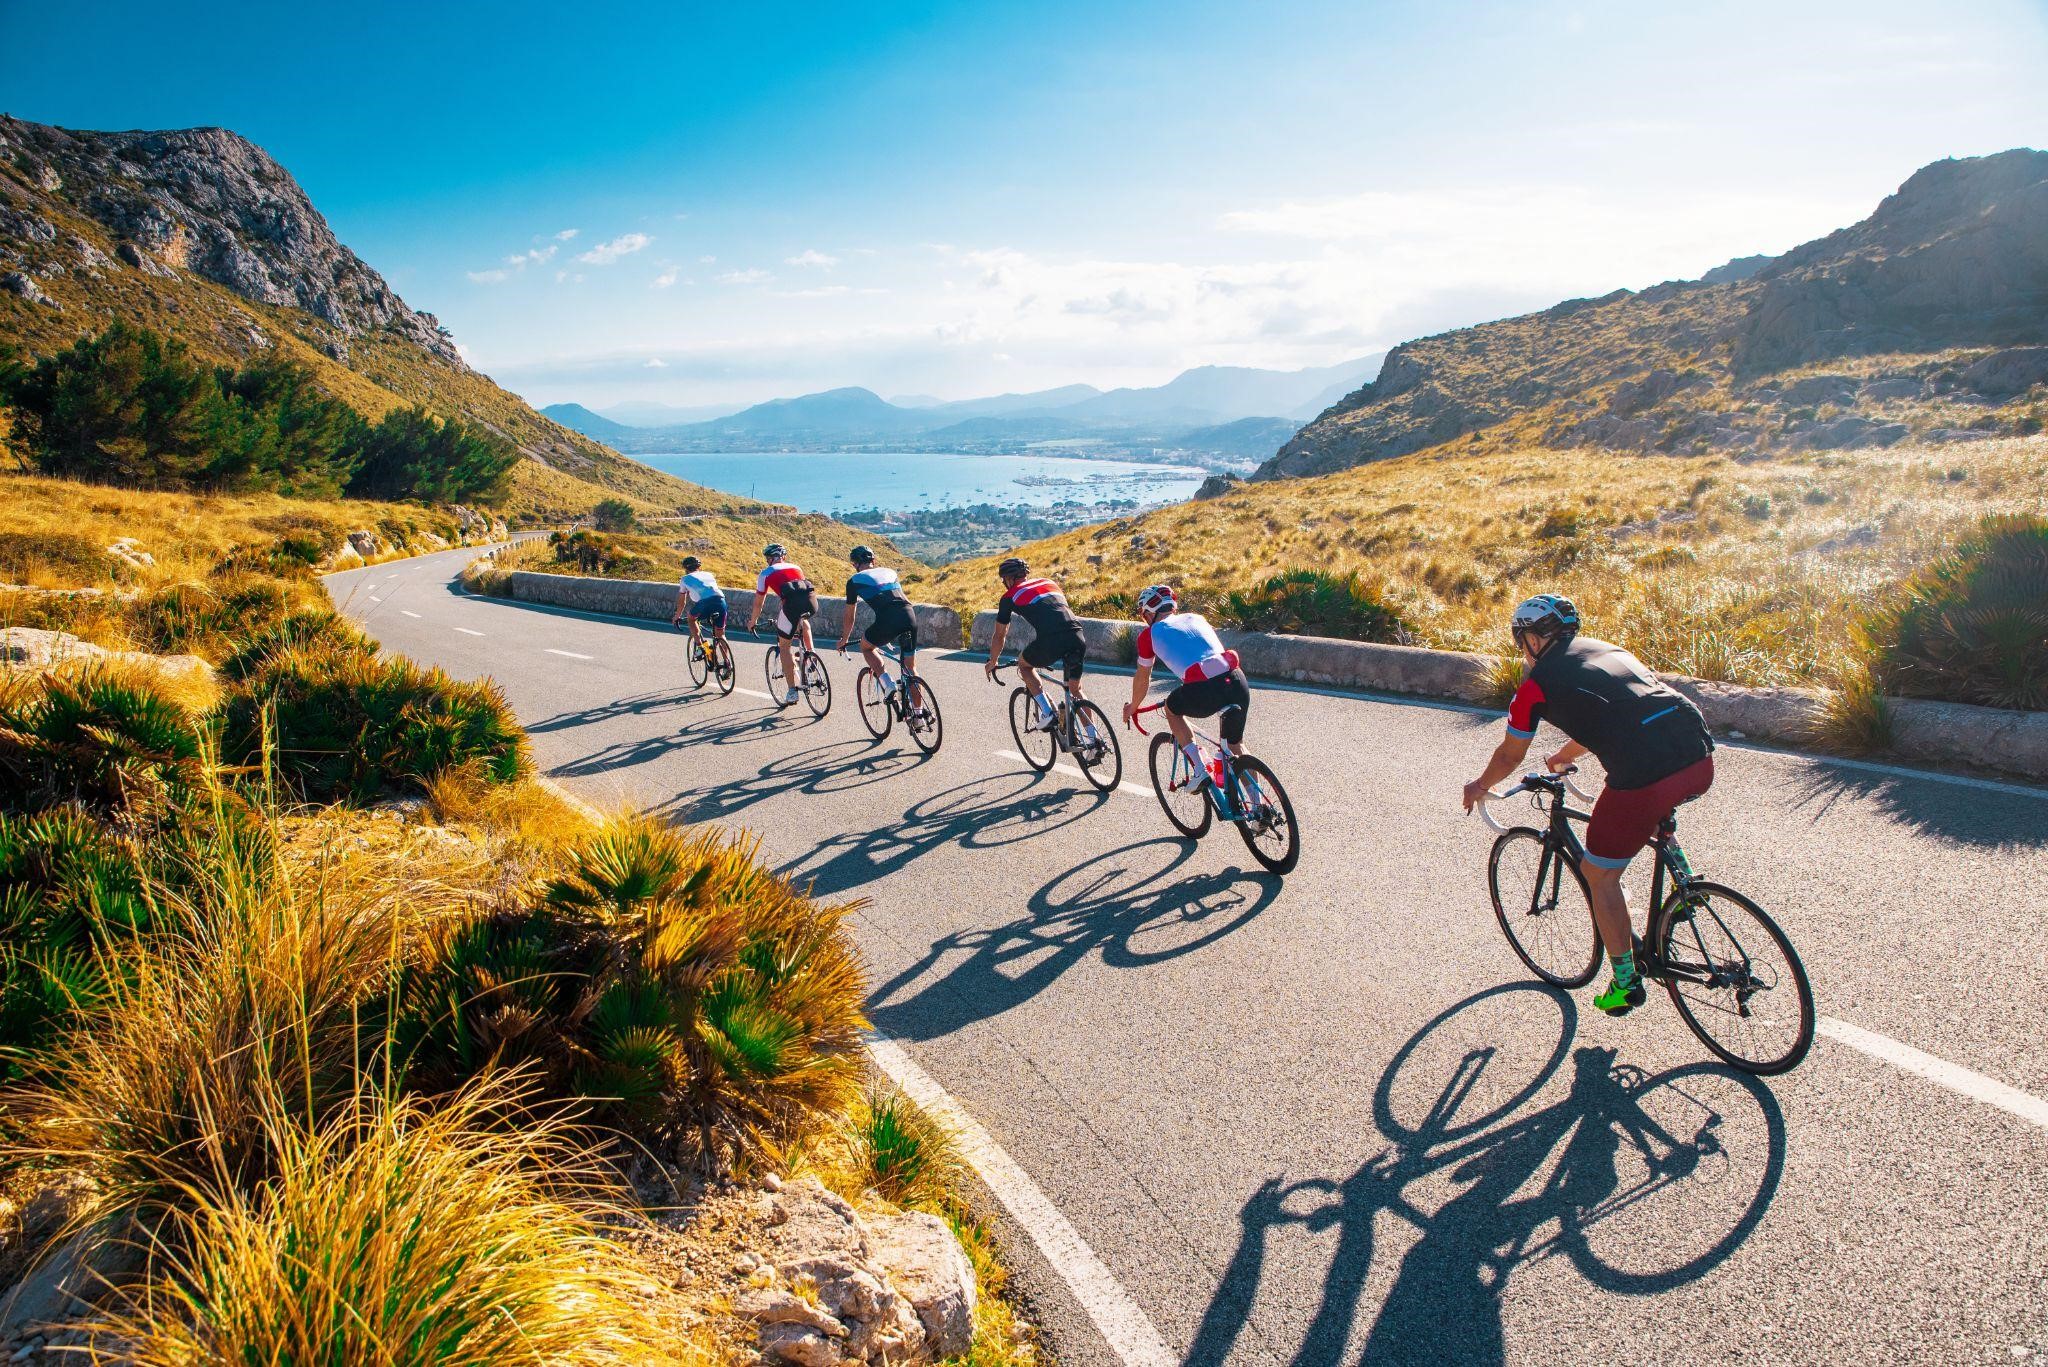 Road cyclists riding through a valley with beautiful surroundings 